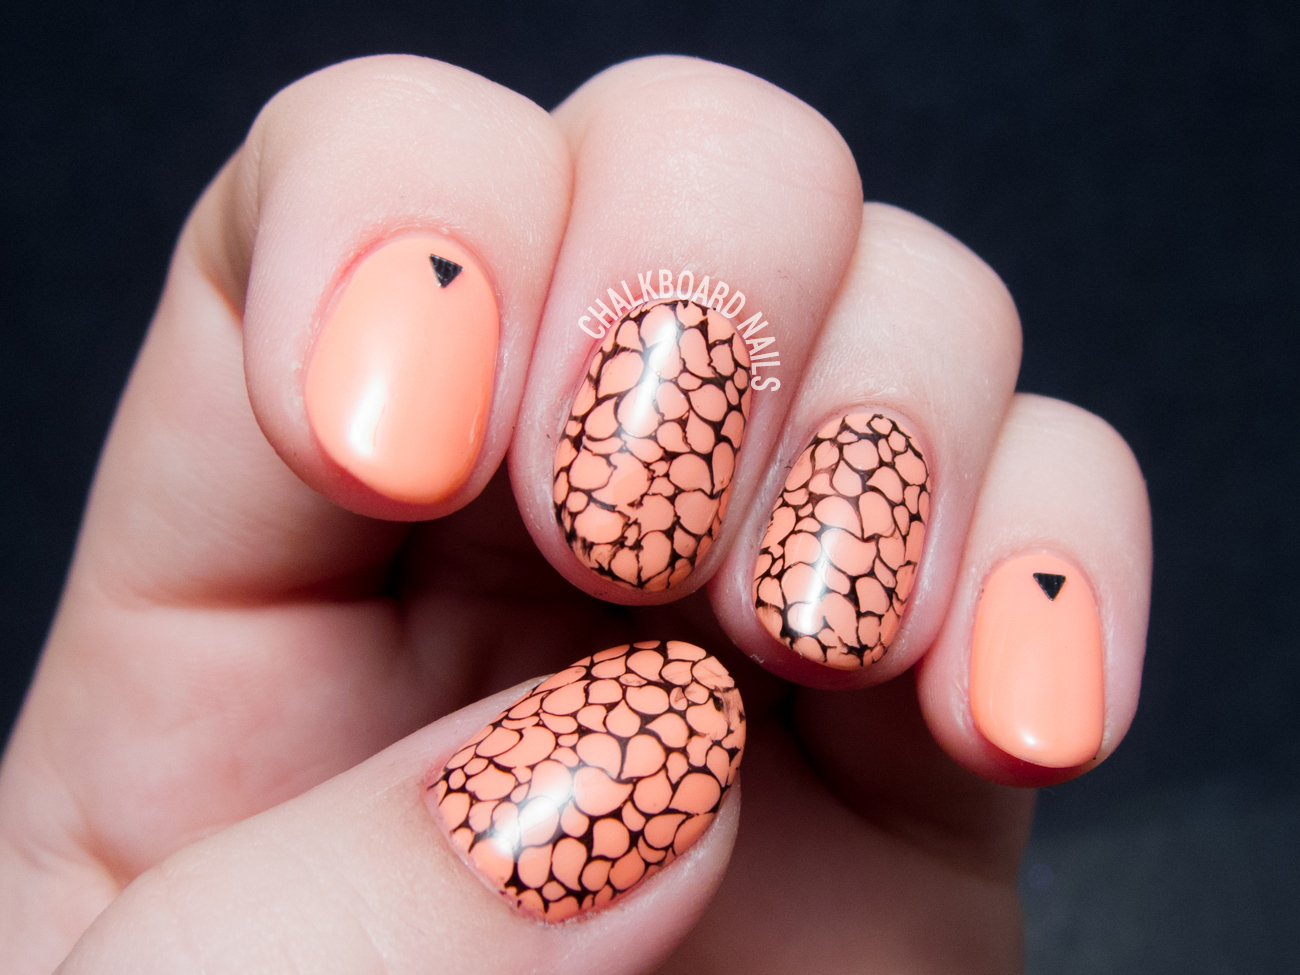 2. Easy Nail Stamping Designs - wide 3